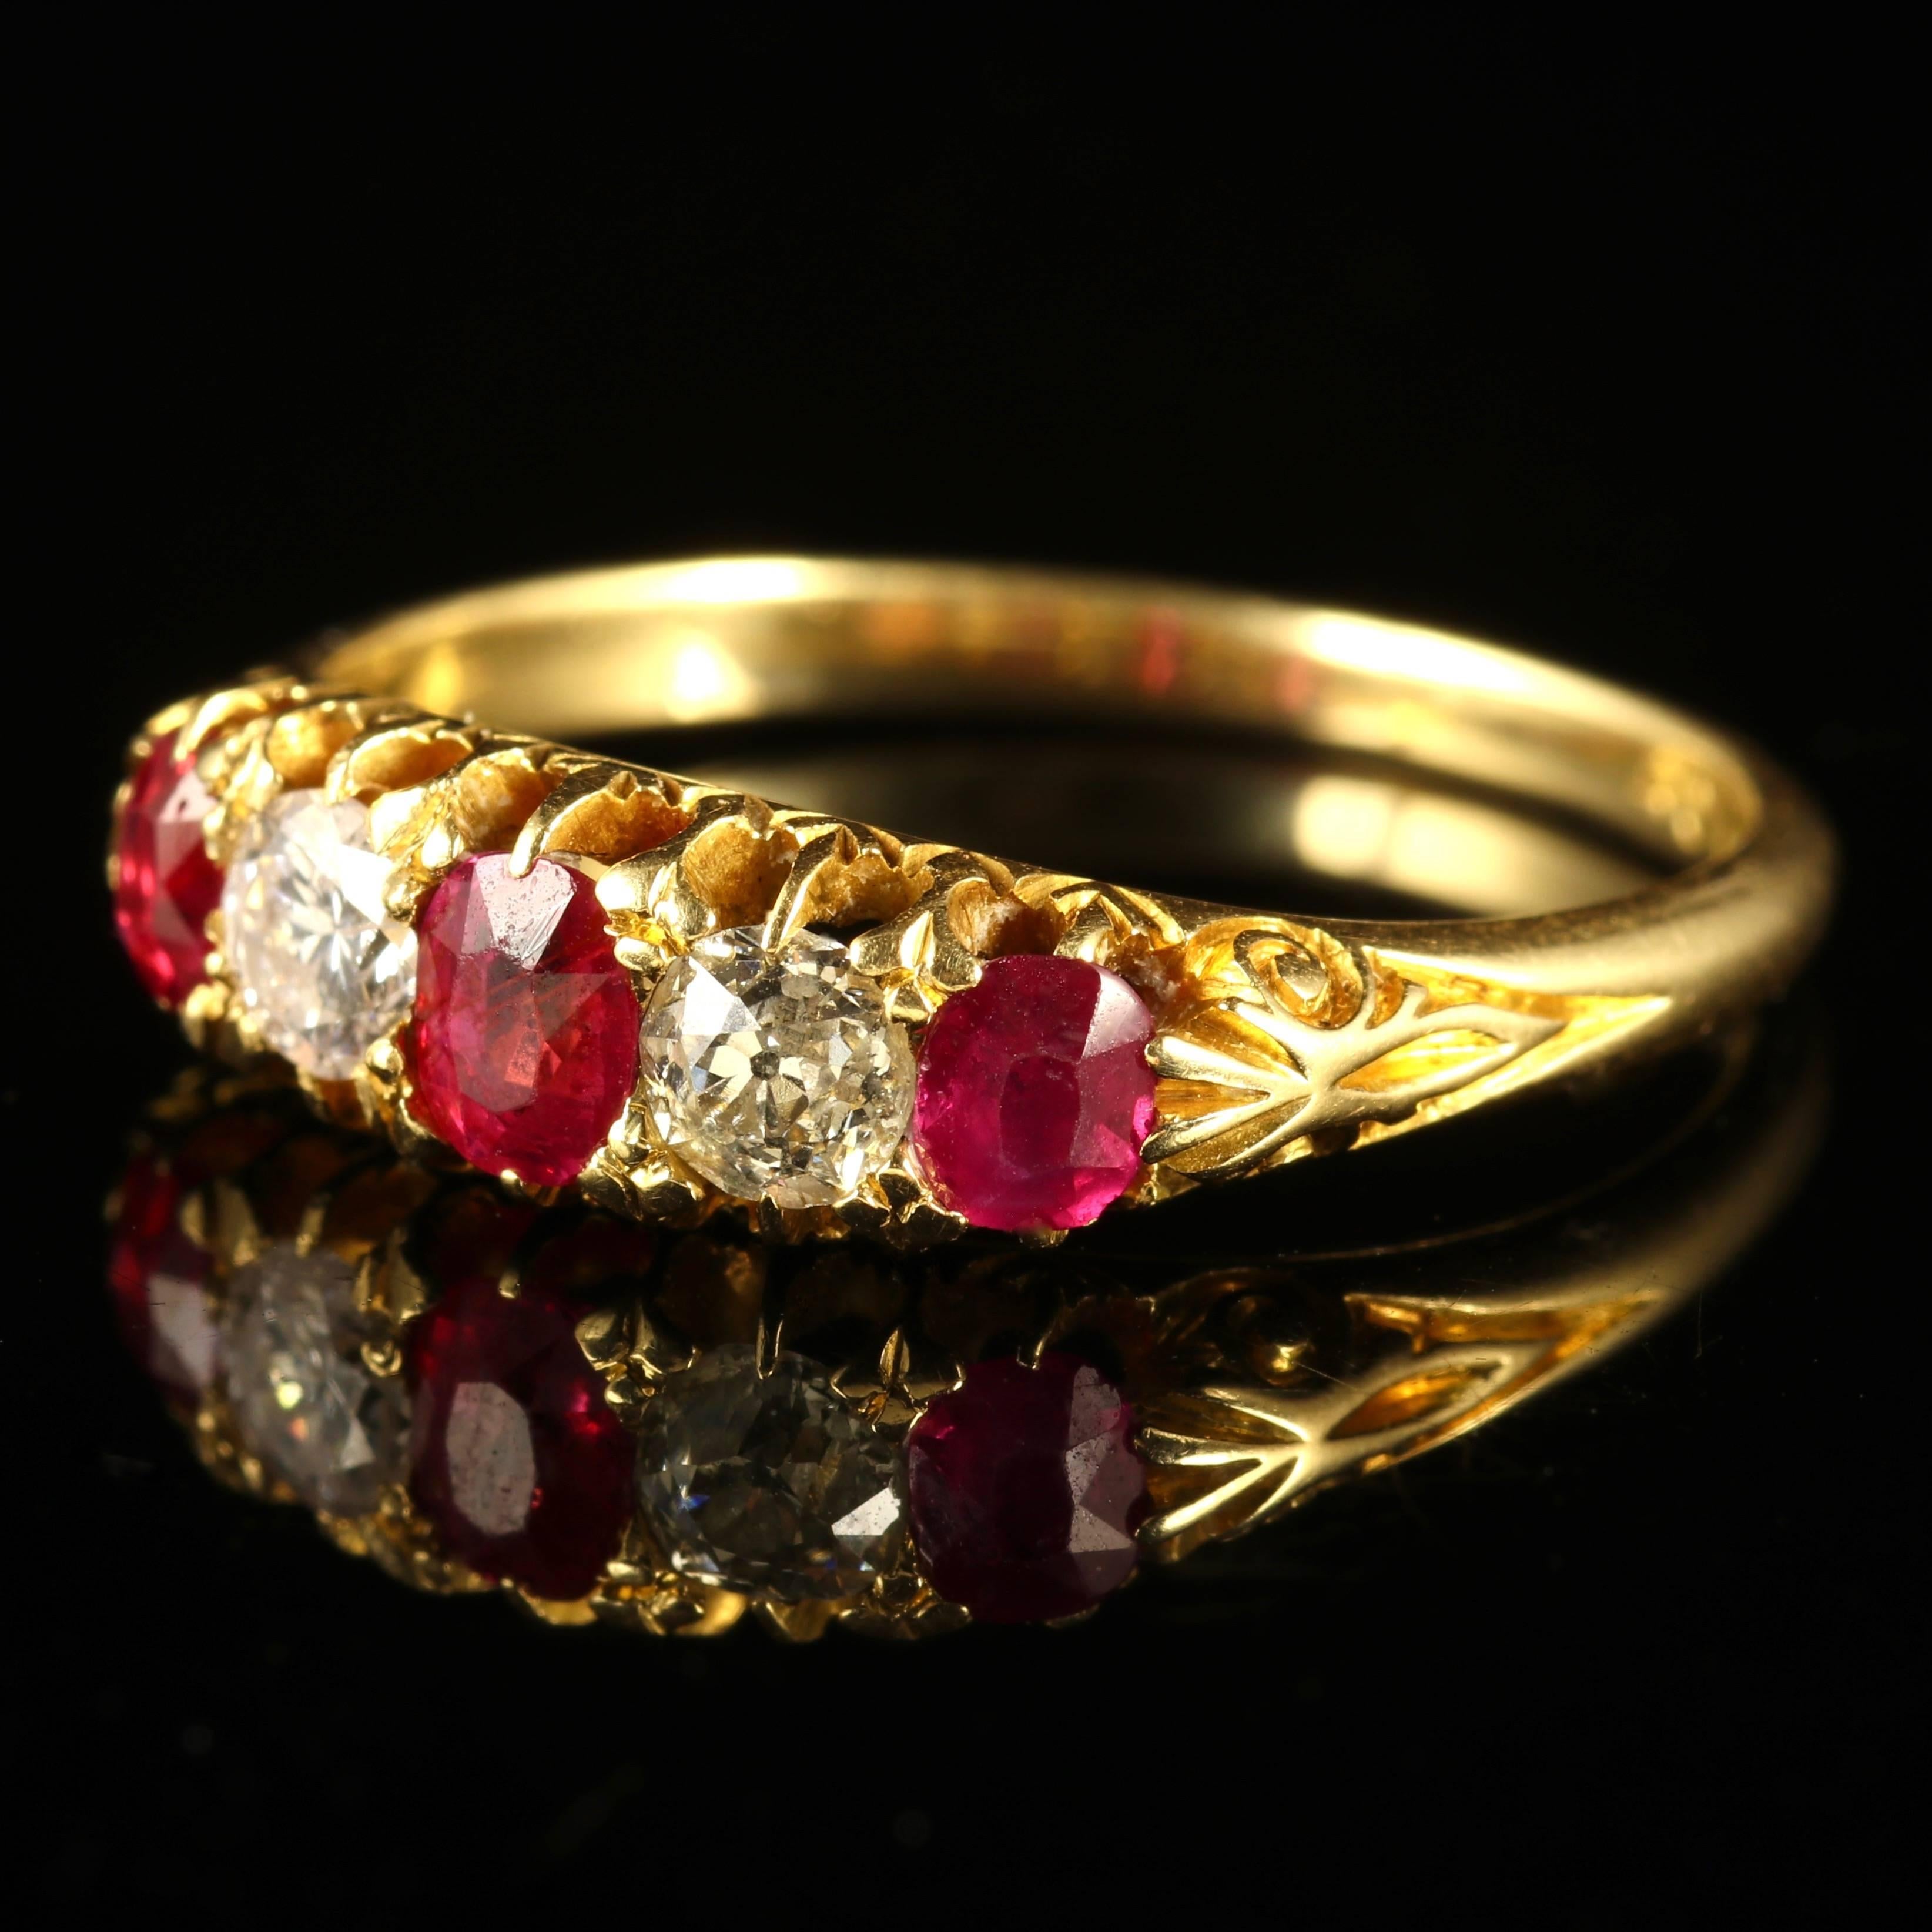 This fabulous antique Victorian 18ct Yellow Gold ring is set with beautiful rich Pink Rubies and Diamonds - Circa 1900.

Three beautiful Burmese Rubies are set into the Victorian gallery complimented by a sparkling cushion of old cut Diamonds.

The